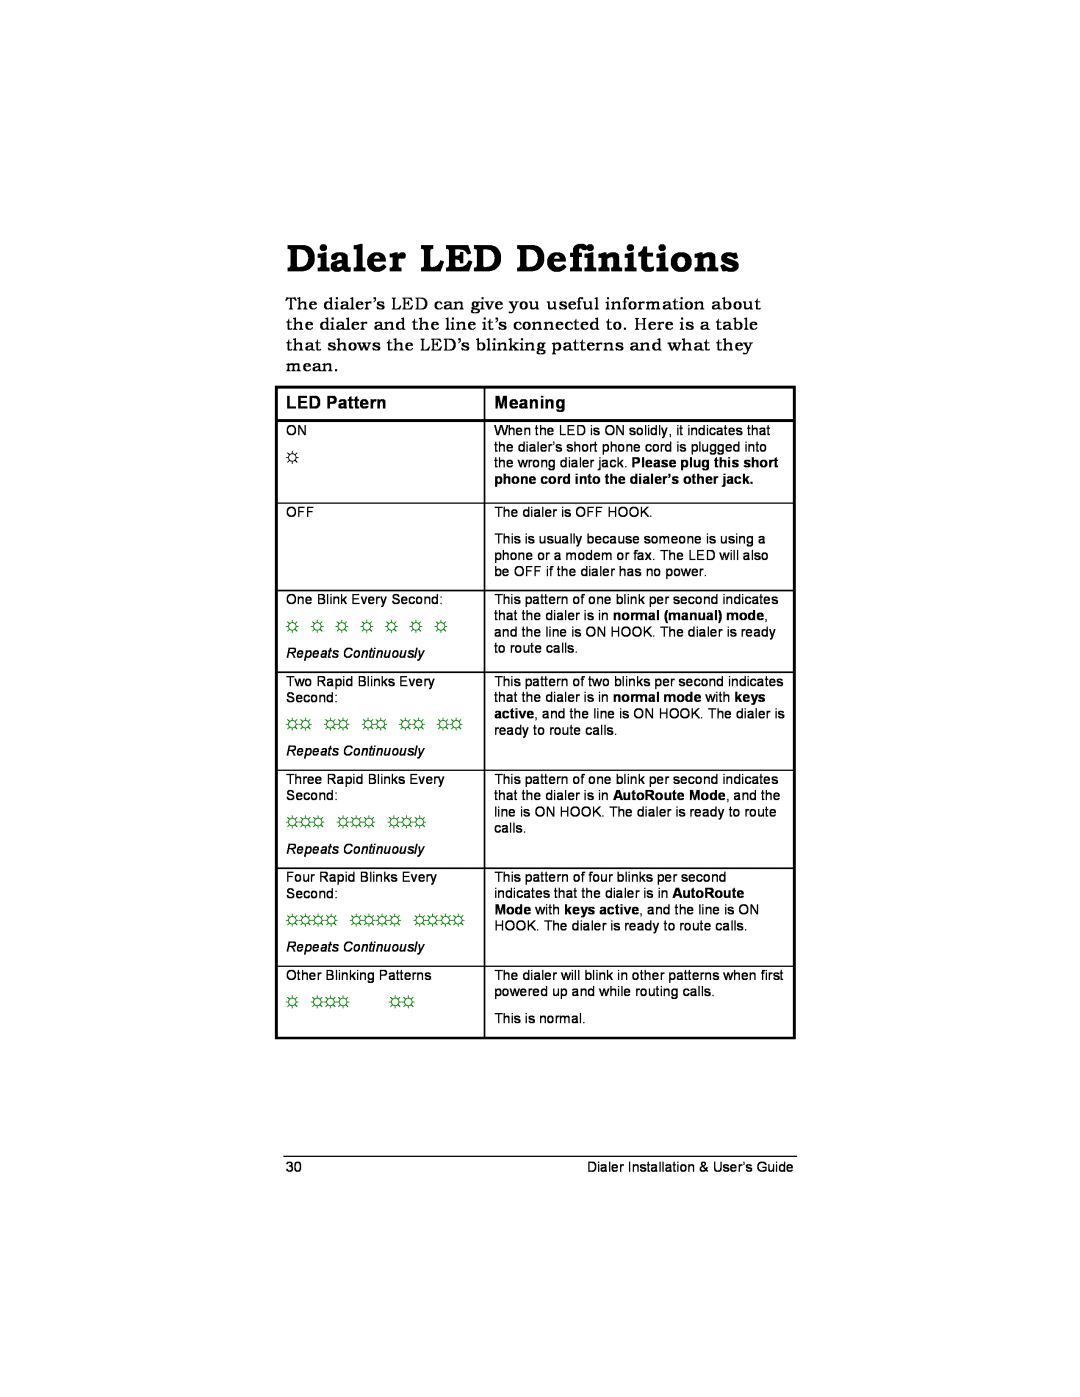 Zoom Dialer 26 Dialer LED Definitions, LED Pattern, Meaning, phone cord into the dialer’s other jack, Repeats Continuously 